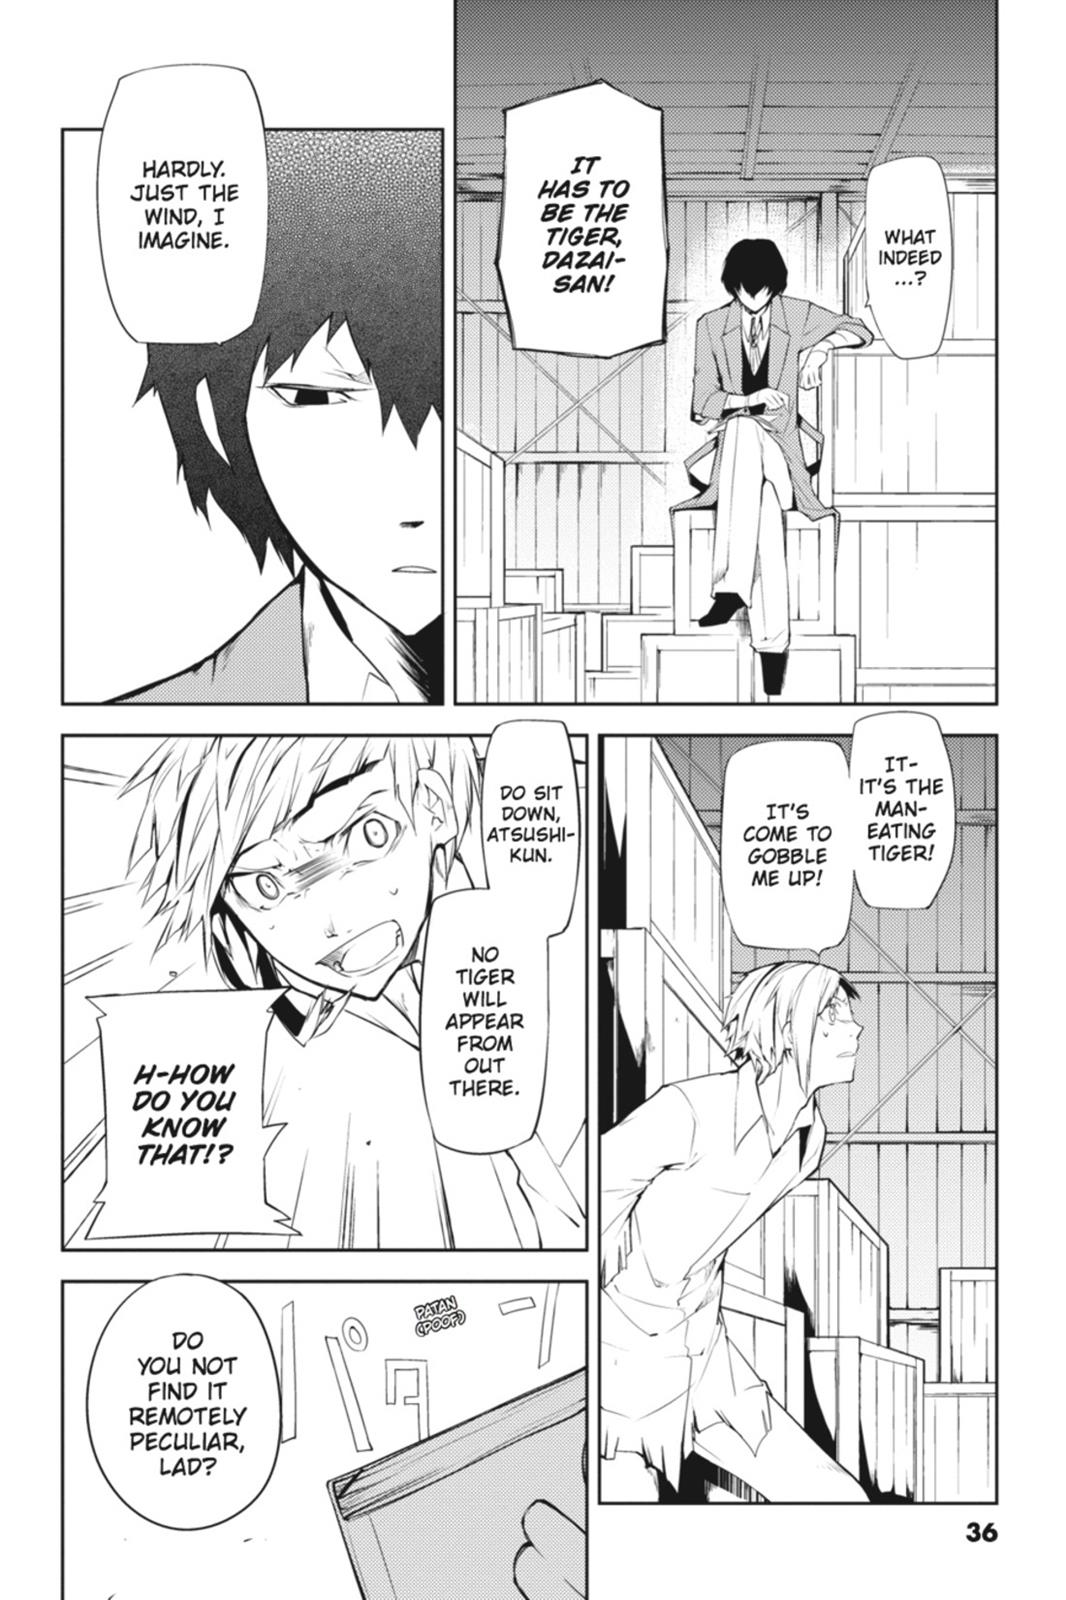 Bungou Stray Dogs, Chapter 1 image 36